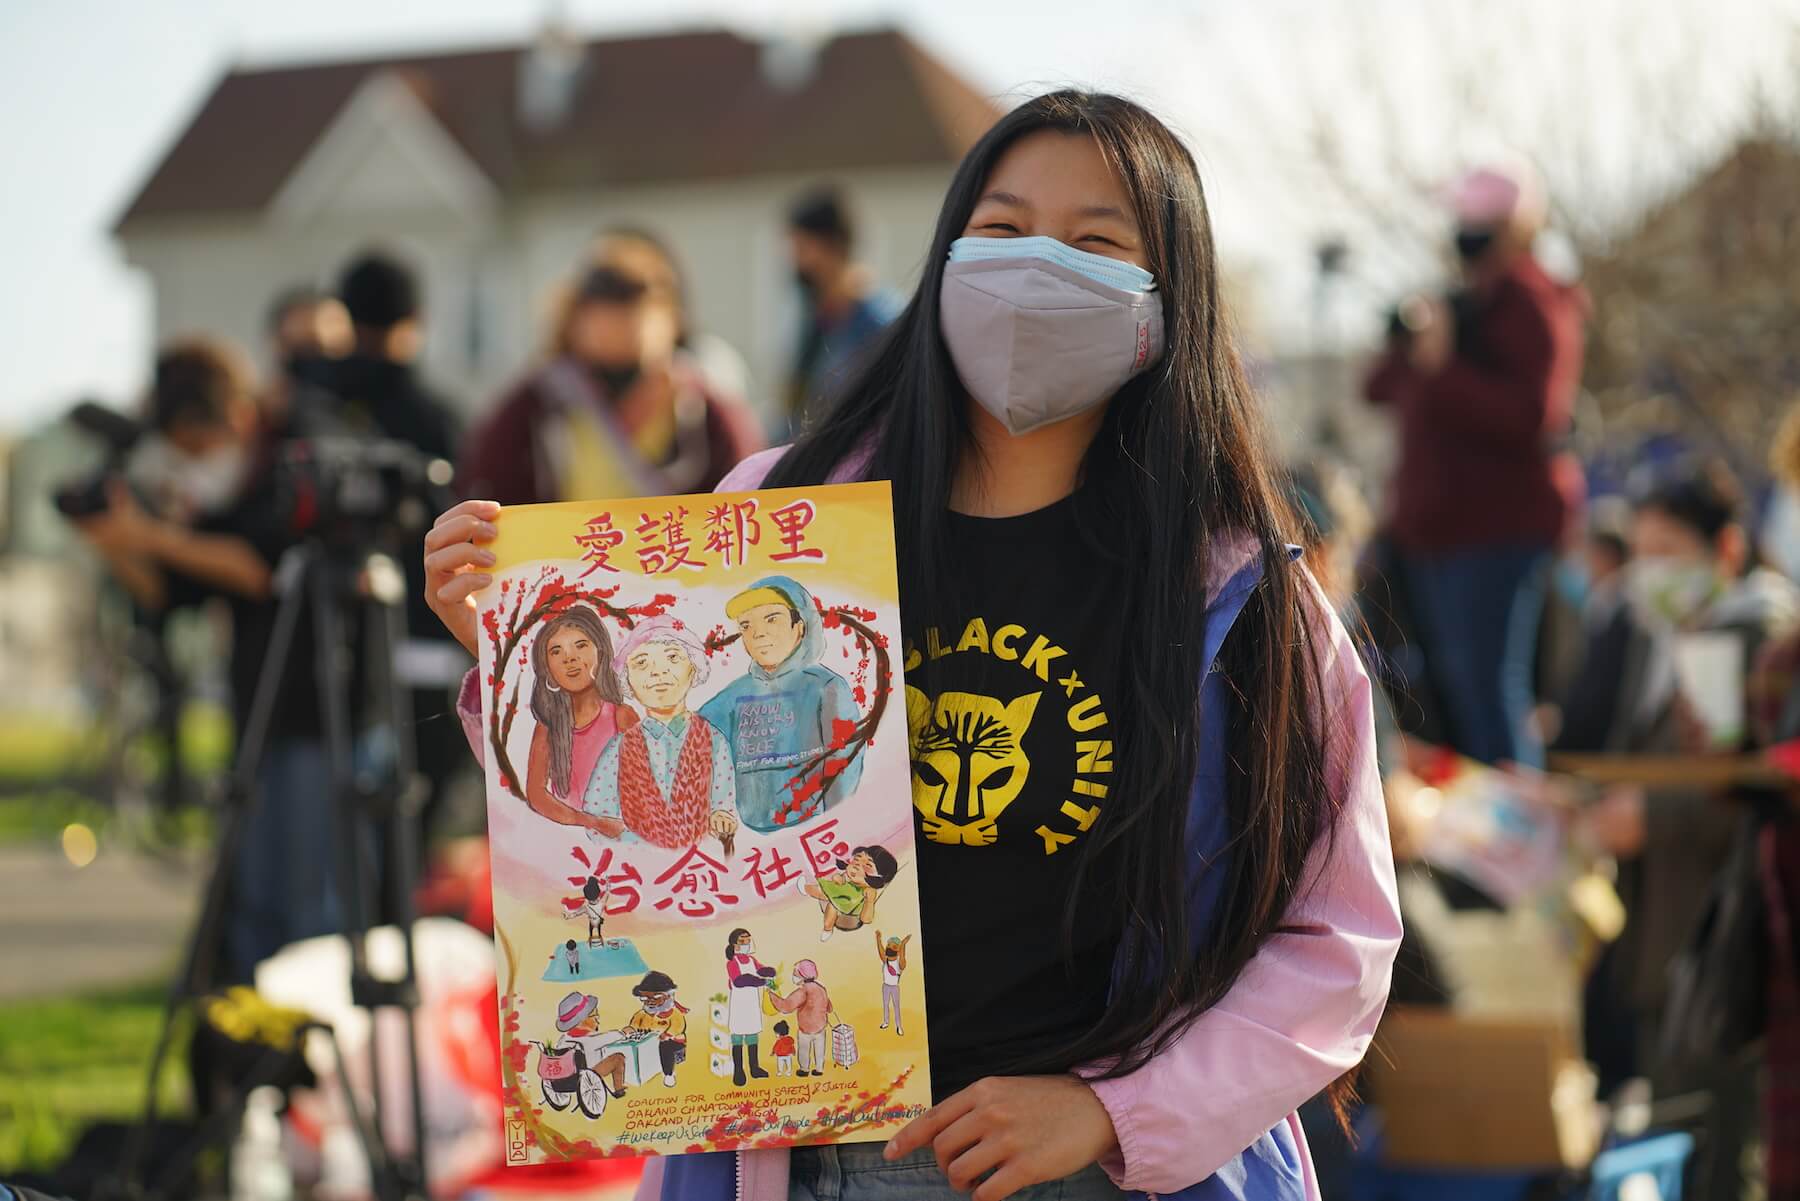 A young Asian woman with long hair holds up a poster at the Love Our Co